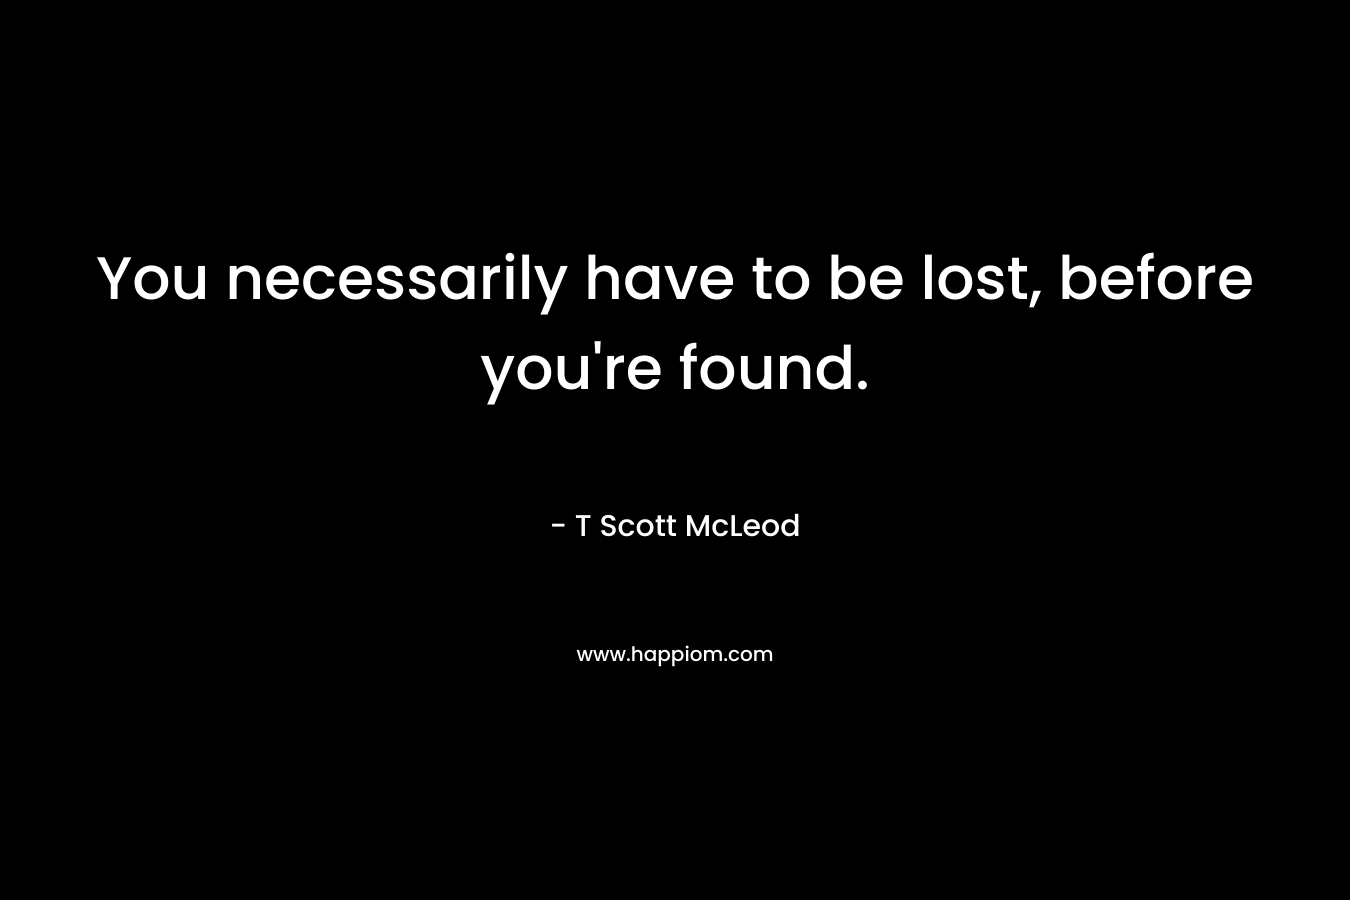 You necessarily have to be lost, before you're found.